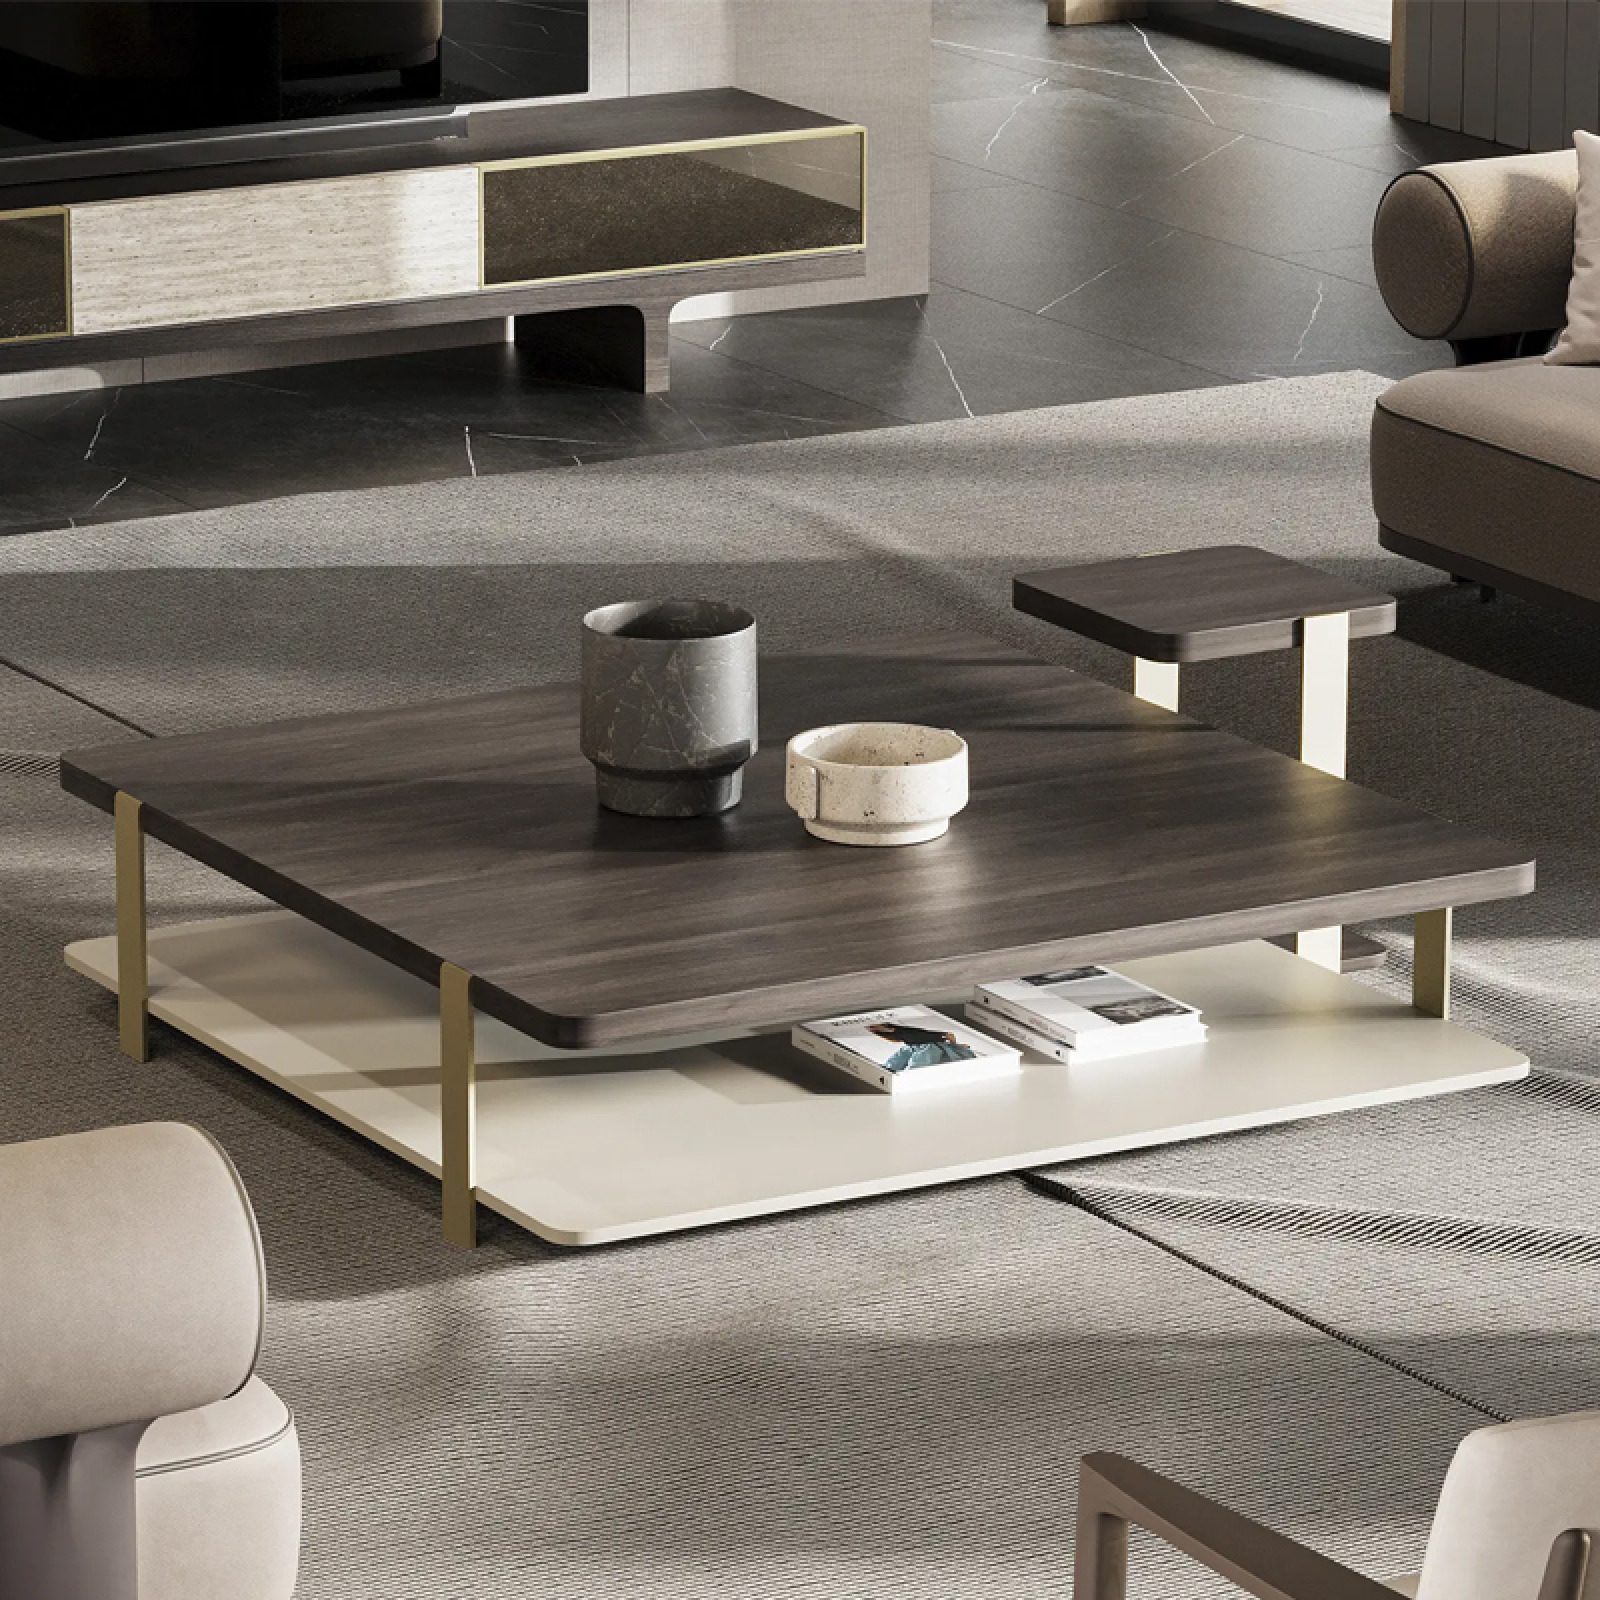 Hector coffee table